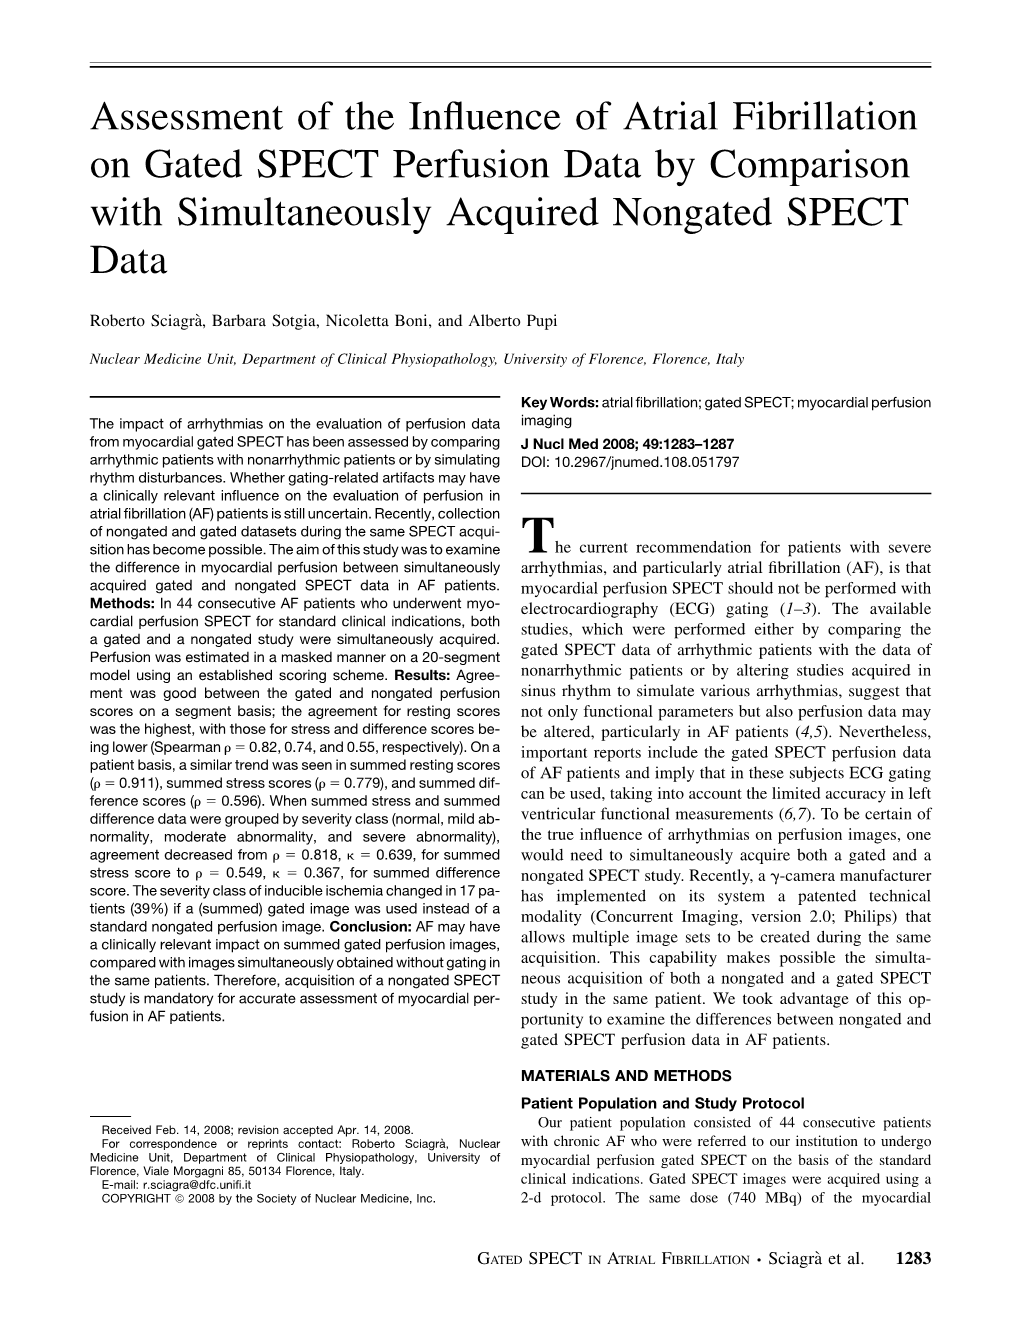 Assessment of the Influence of Atrial Fibrillation on Gated SPECT Perfusion Data by Comparison with Simultaneously Acquired Nong